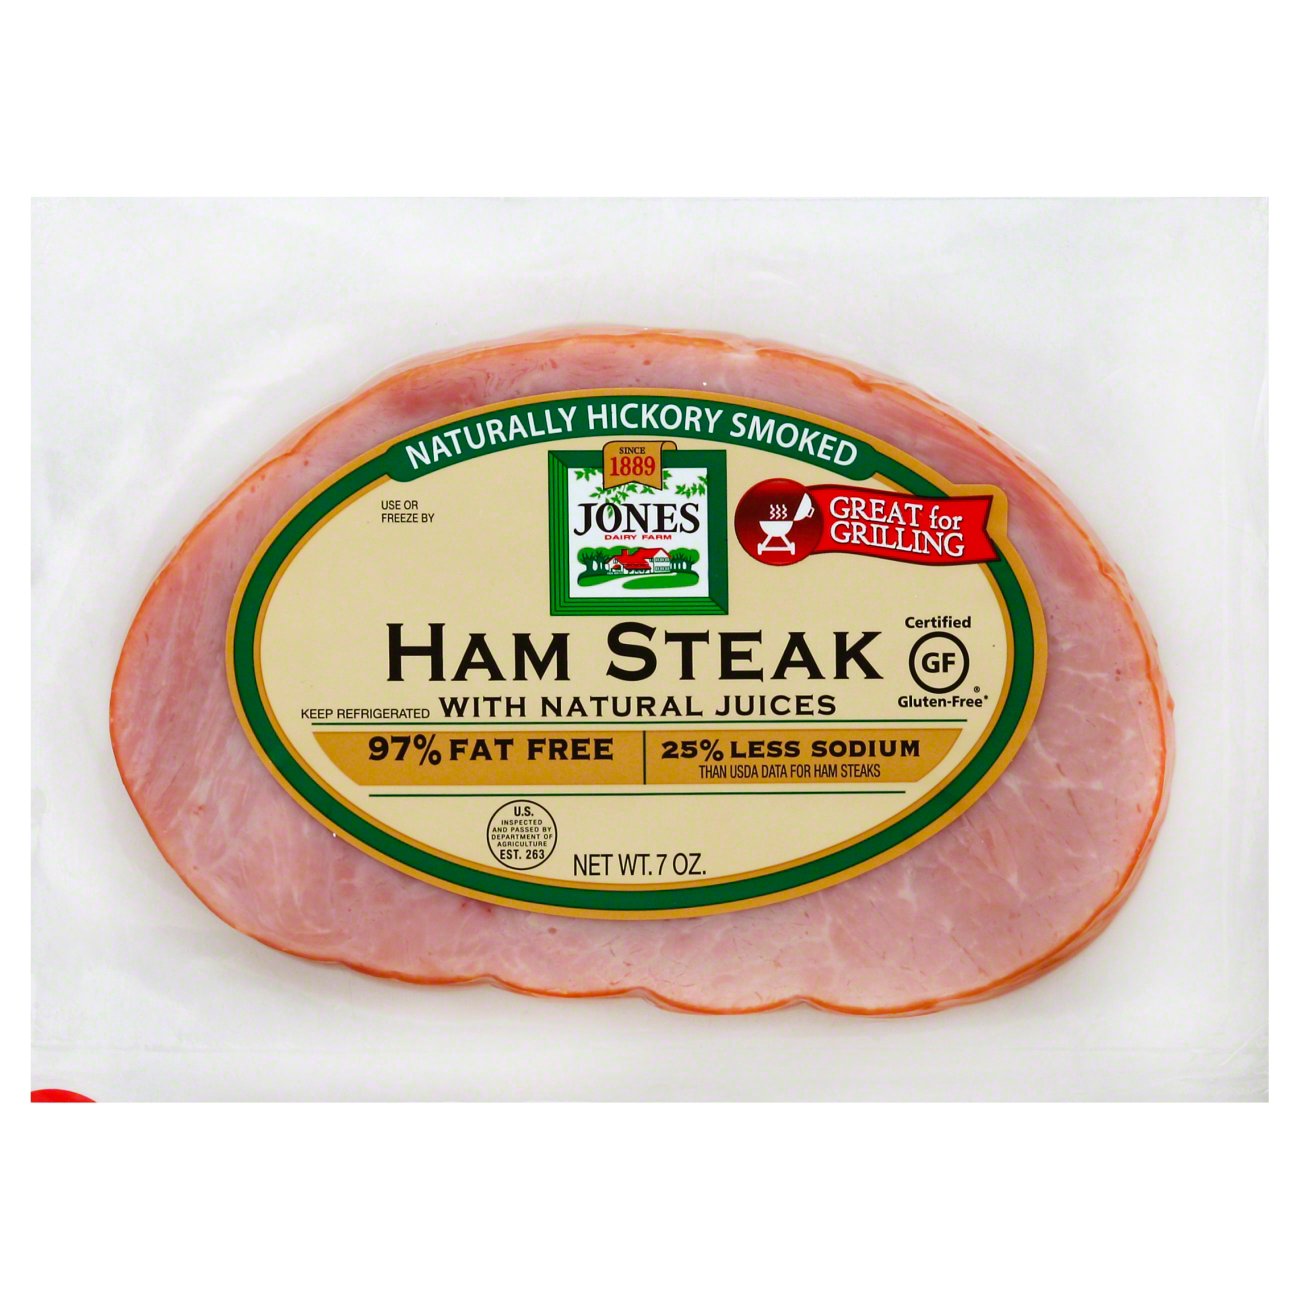 Jones Dairy Farm Naturally Hickory Smoked Extra Lean Ham Steak Shop Meat At H E B,Date Bread Rings